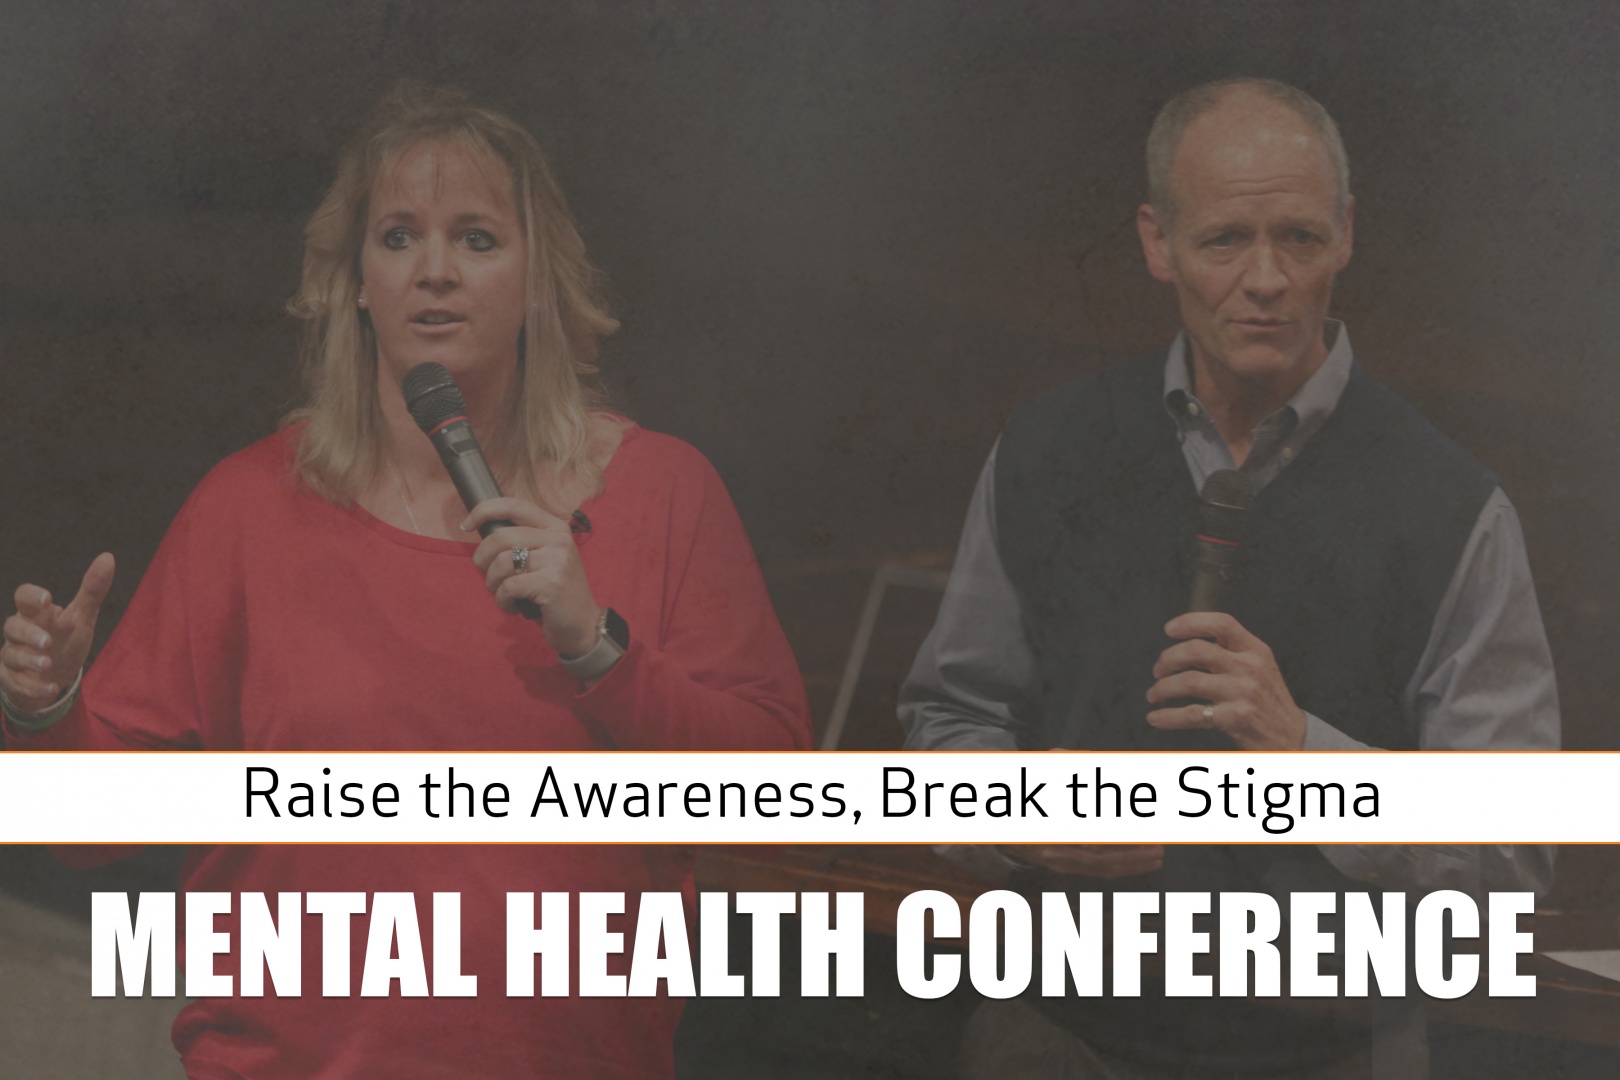 Mental Health Conference